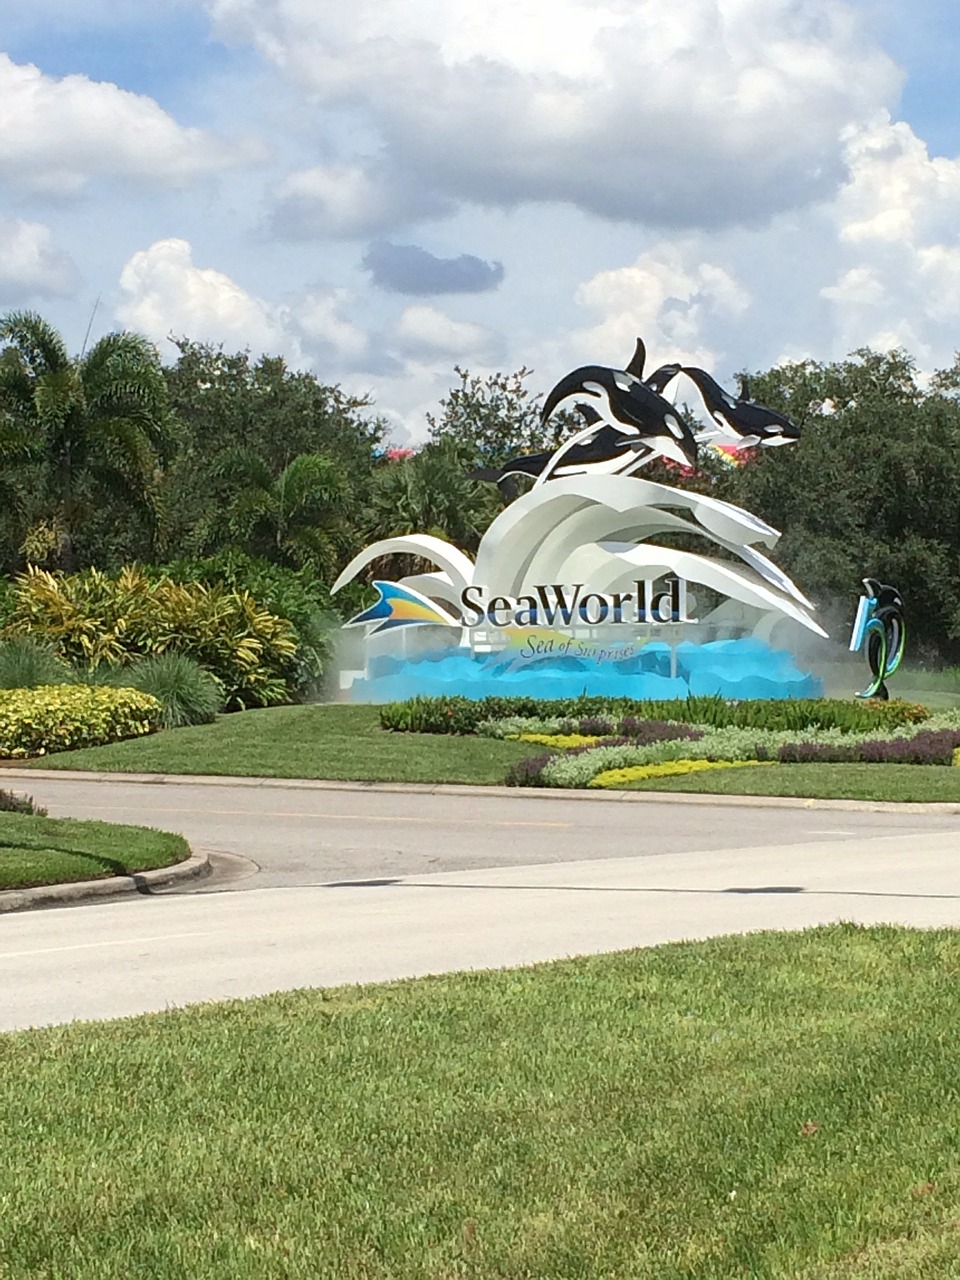 Entrance sign for SeaWorld®, near where the Residence Inn Orlando at SeaWorld® is located.